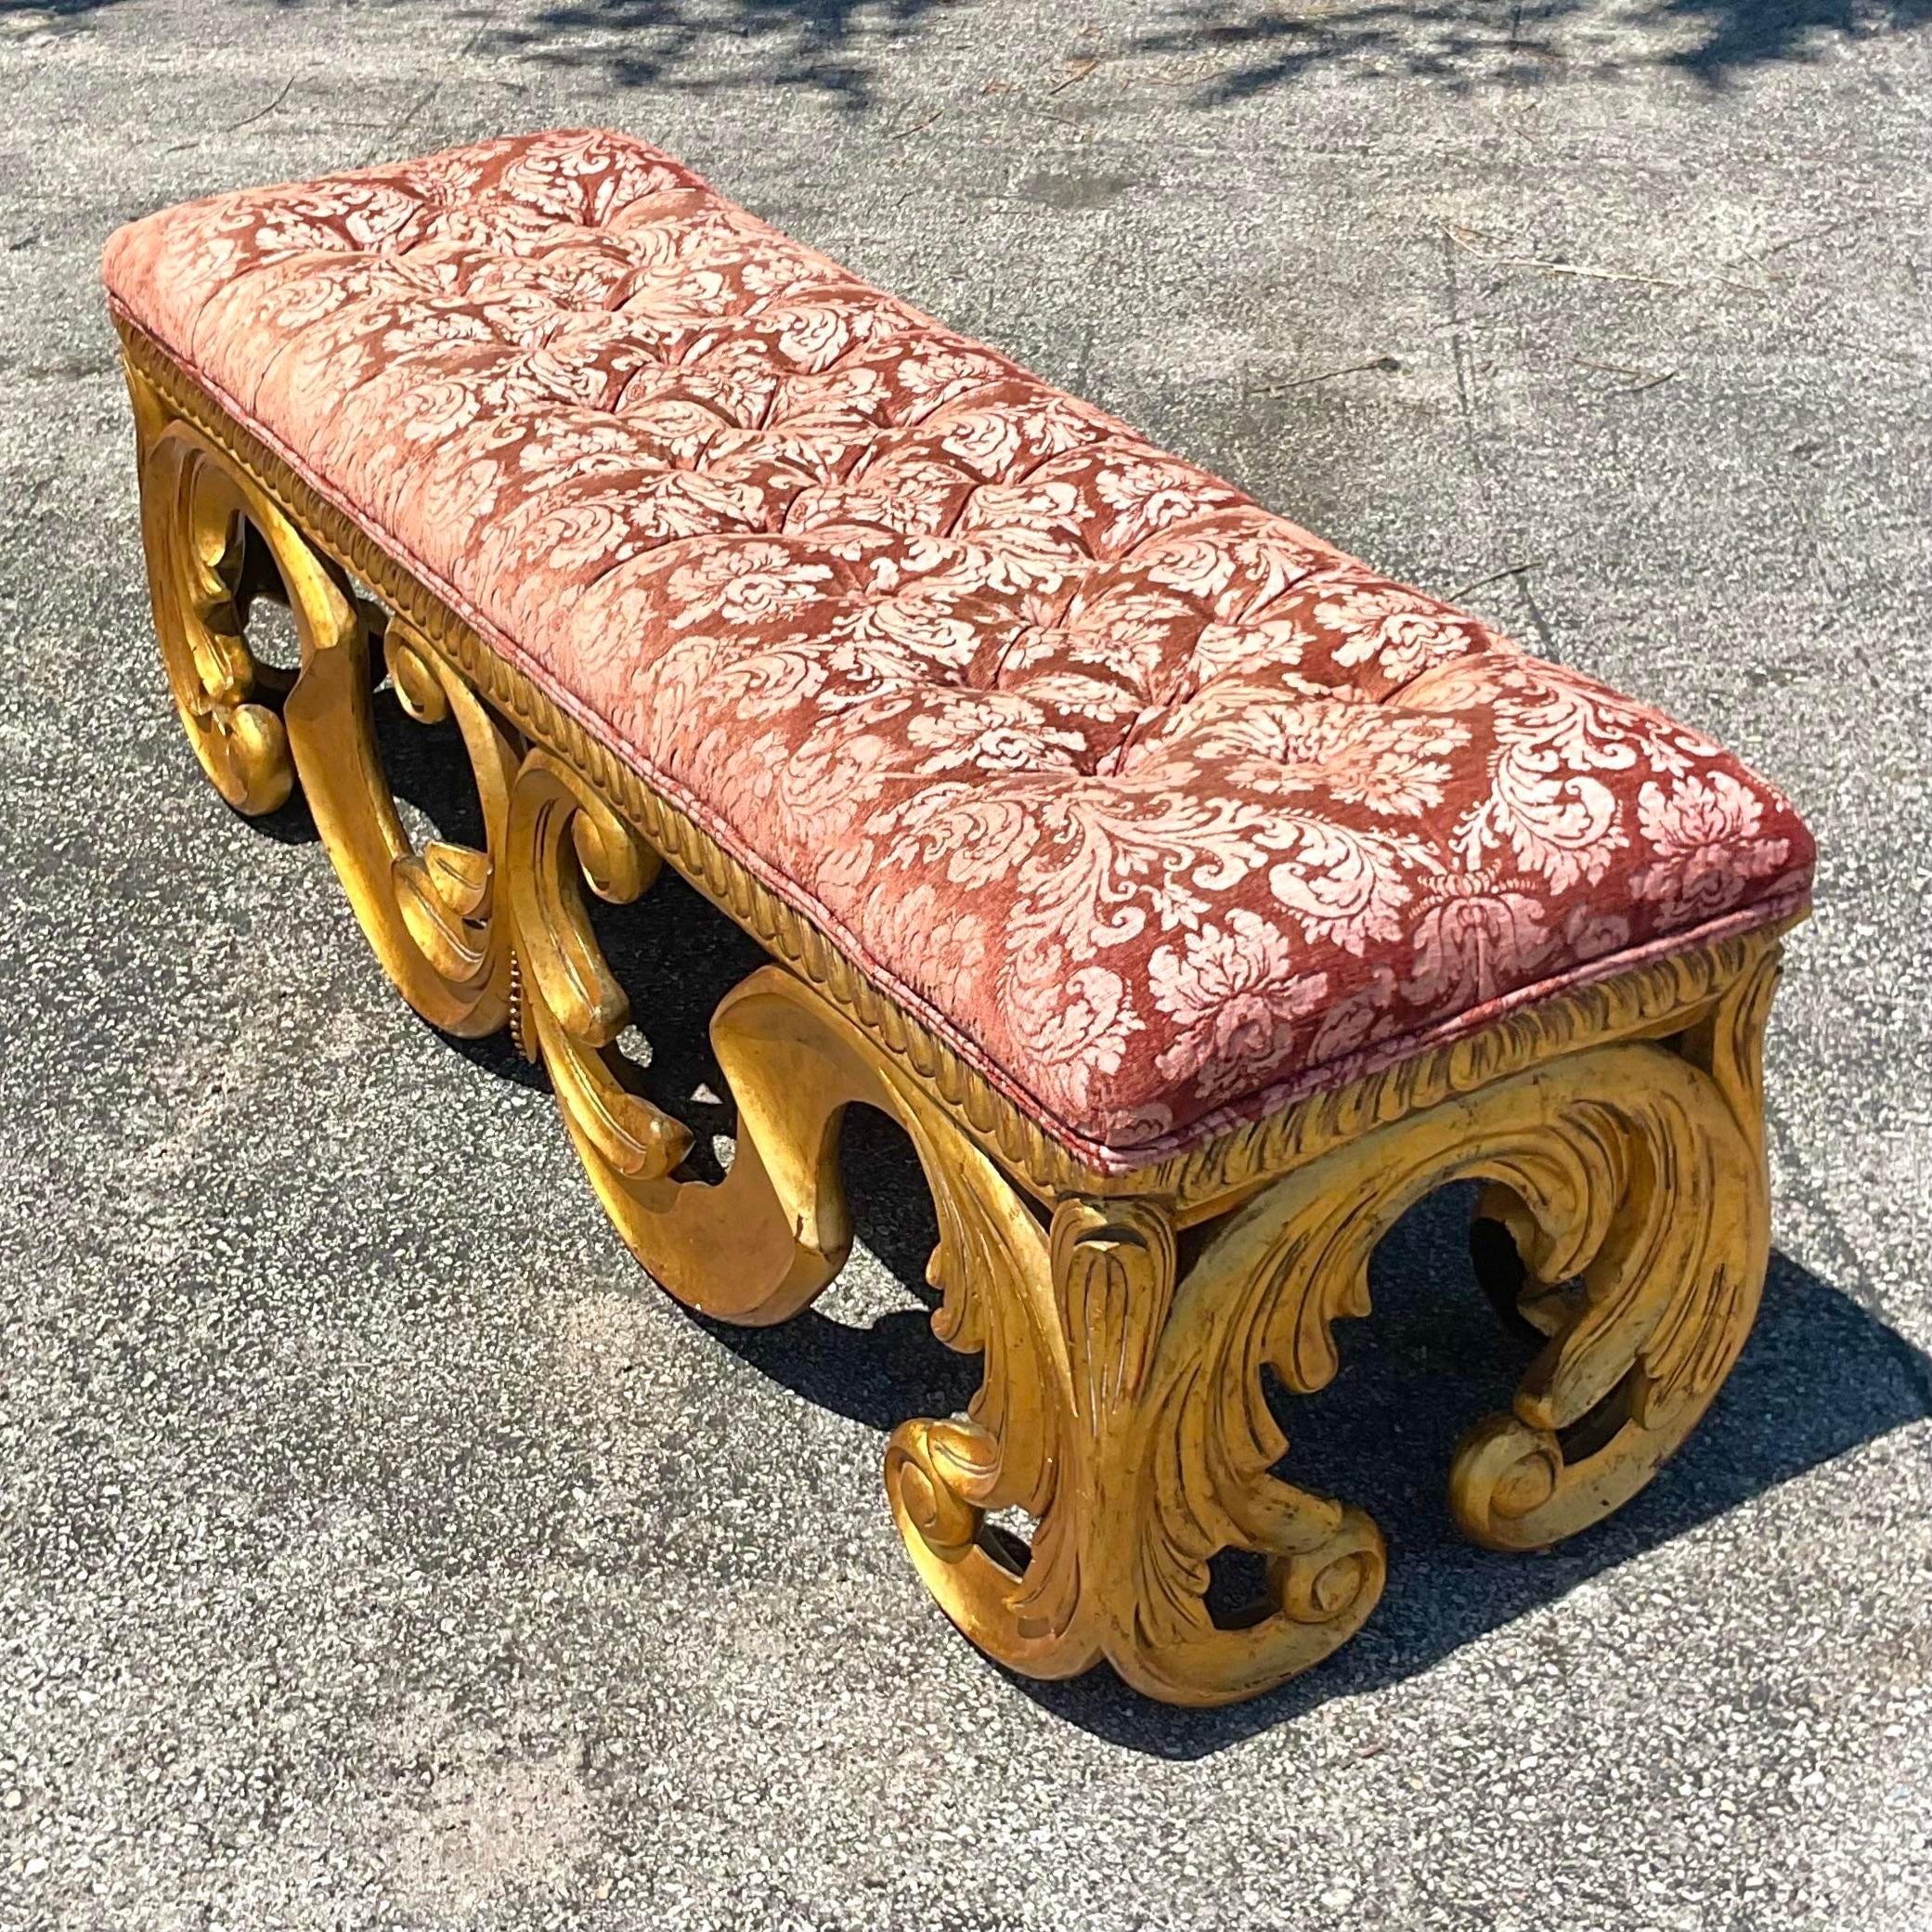 Add a touch of opulence to your space with our Vintage Regency Tufted Gilt Bench. American-crafted and exquisitely designed, this bench combines classic Regency style with tufted upholstery and gilt accents, offering a blend of luxury and comfort